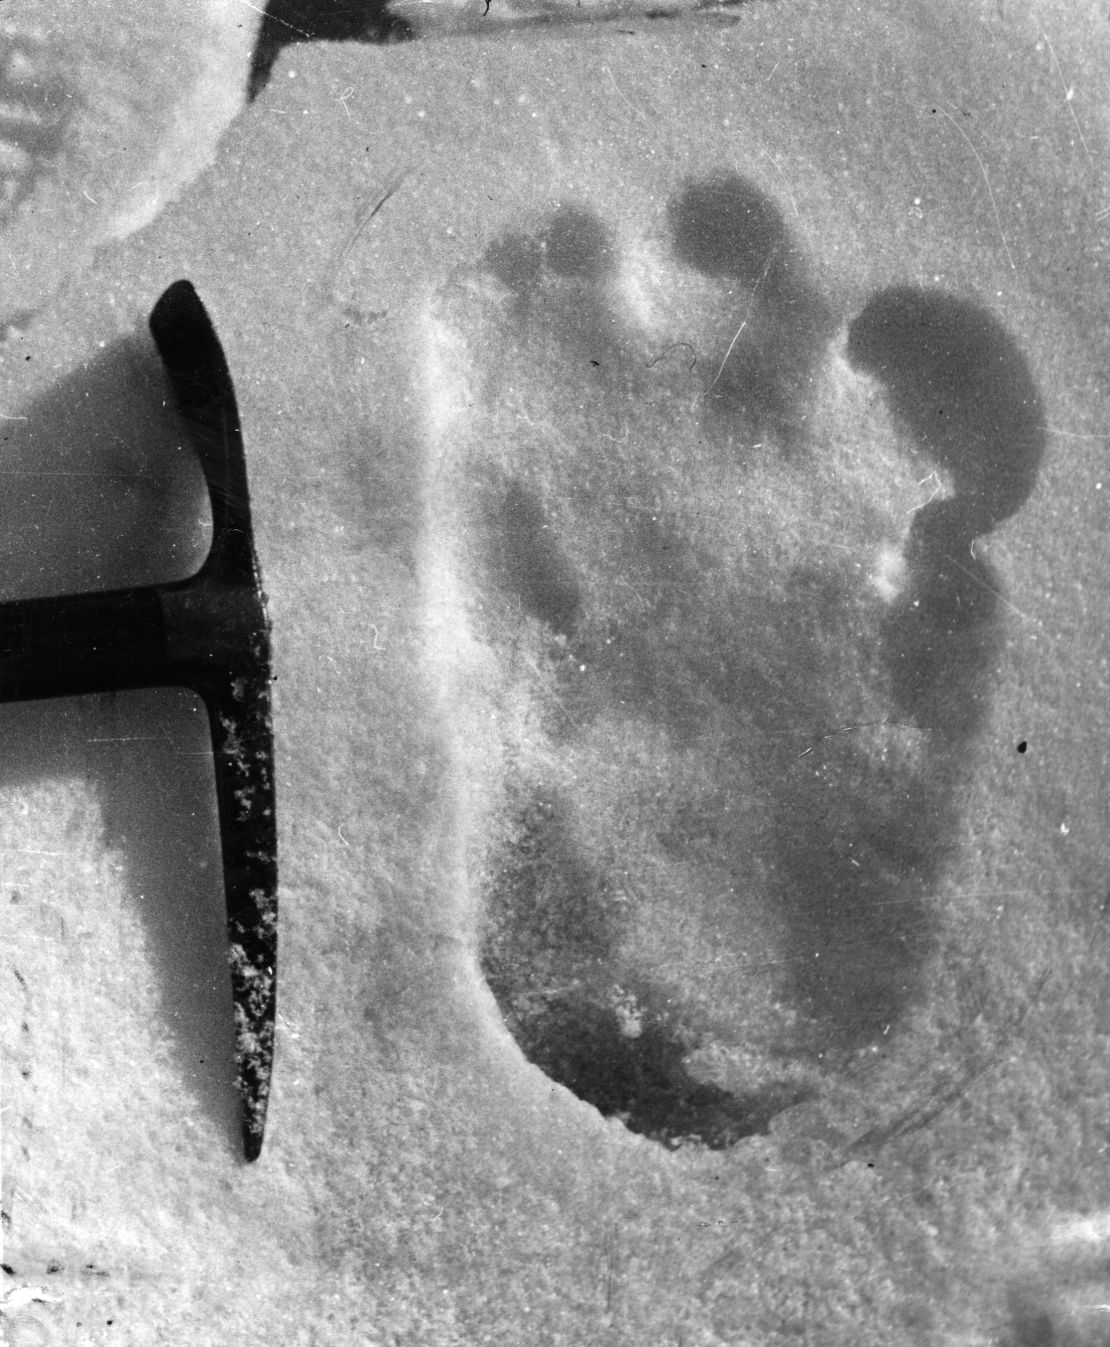 A footprint of Yeti, discovered near Mount Everest in 1951.